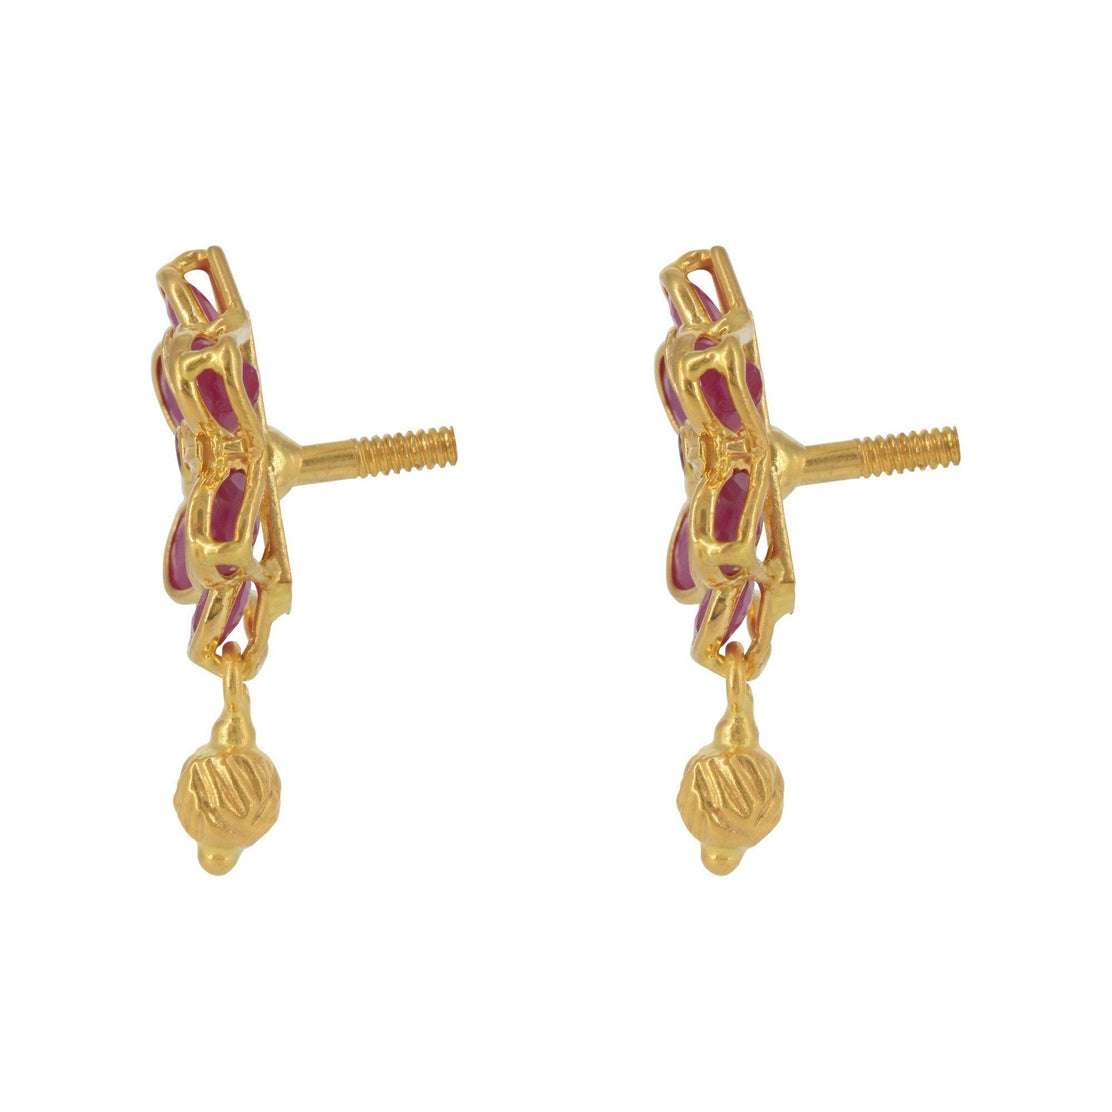 235-GER15952 - 22K Gold Earrings For Baby with Cz | Baby earrings, 22k gold  earrings, Gold earrings